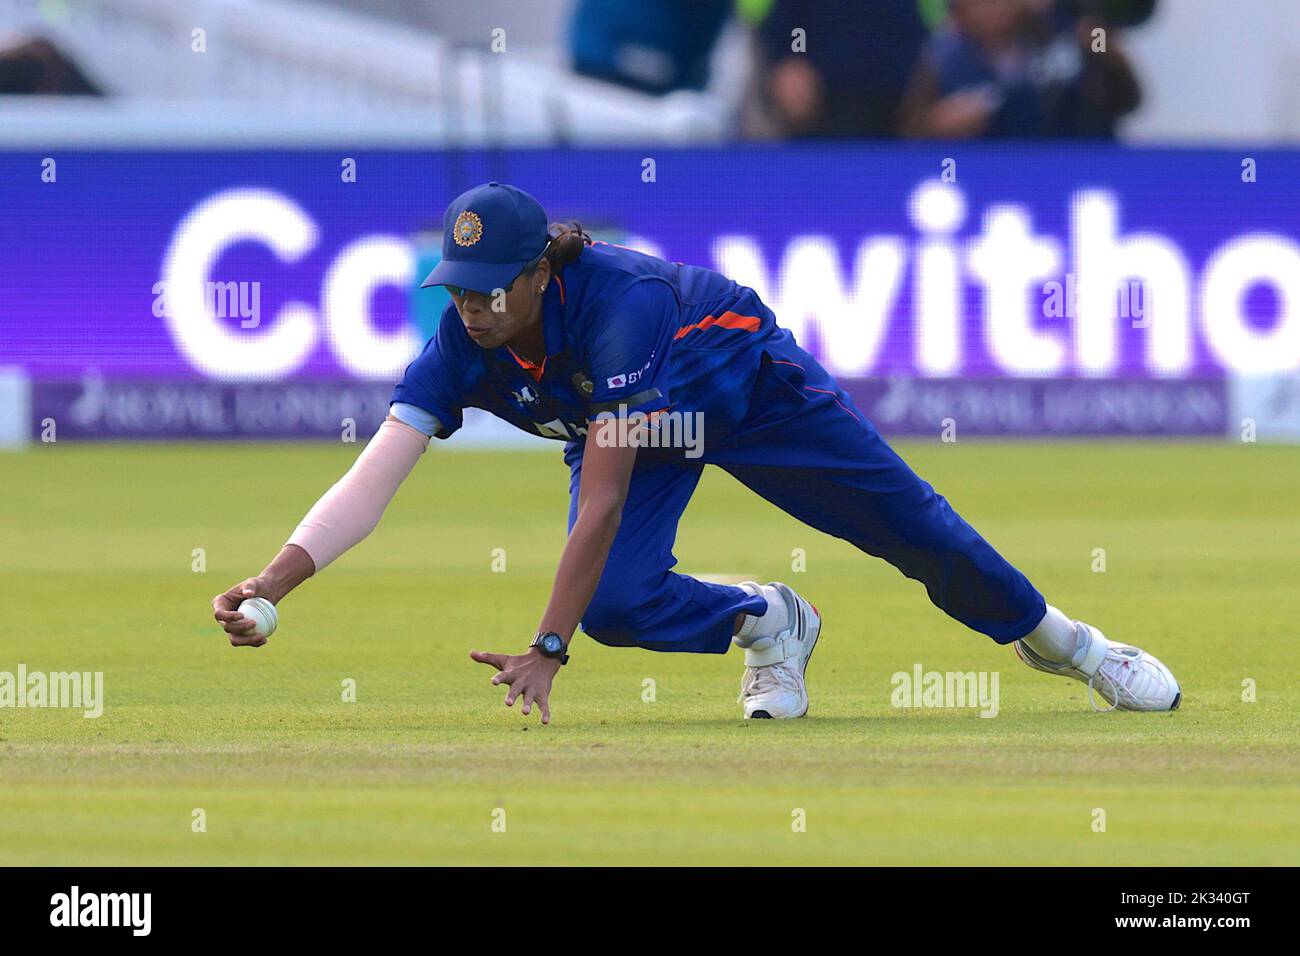 24 September , 2022, London, UK. India’s Jhulan Goswami fielding as England women take on India in the 3rd Royal London One Day International at Lords. David Rowe/Alamy Live News. Stock Photo